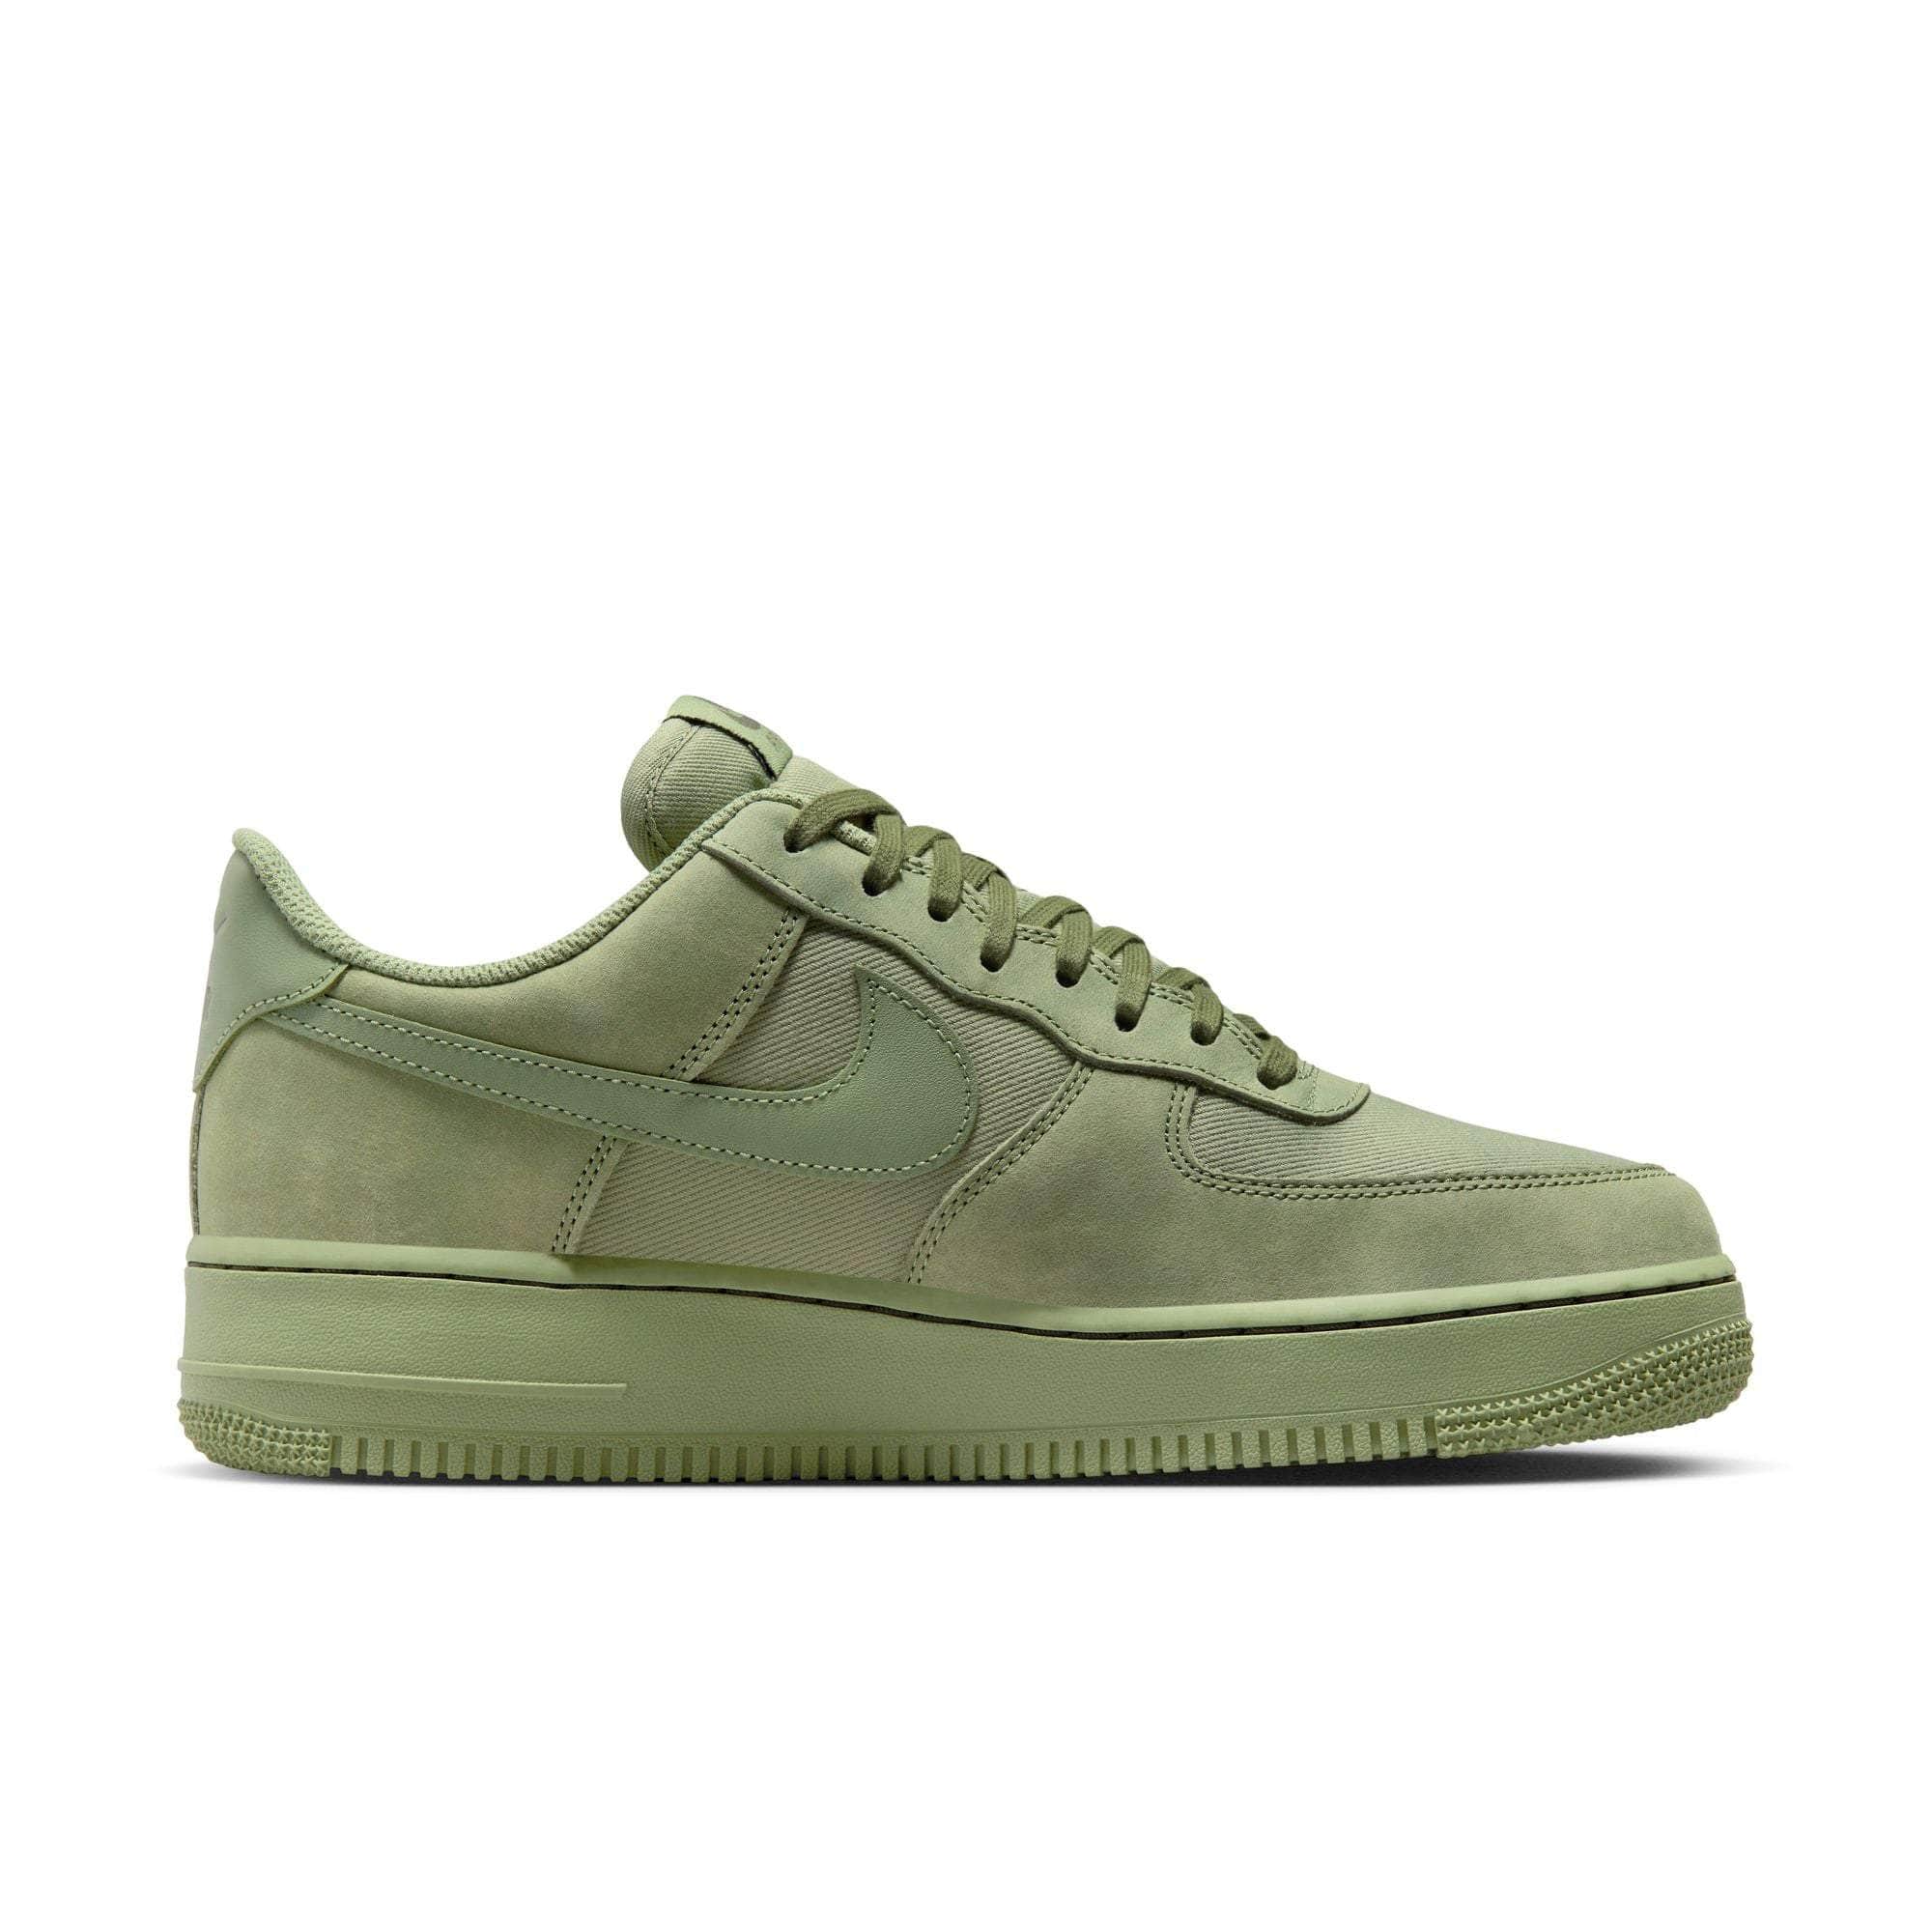 Nike Air Force 1 '07 LX Shoes - Men's - GBNY